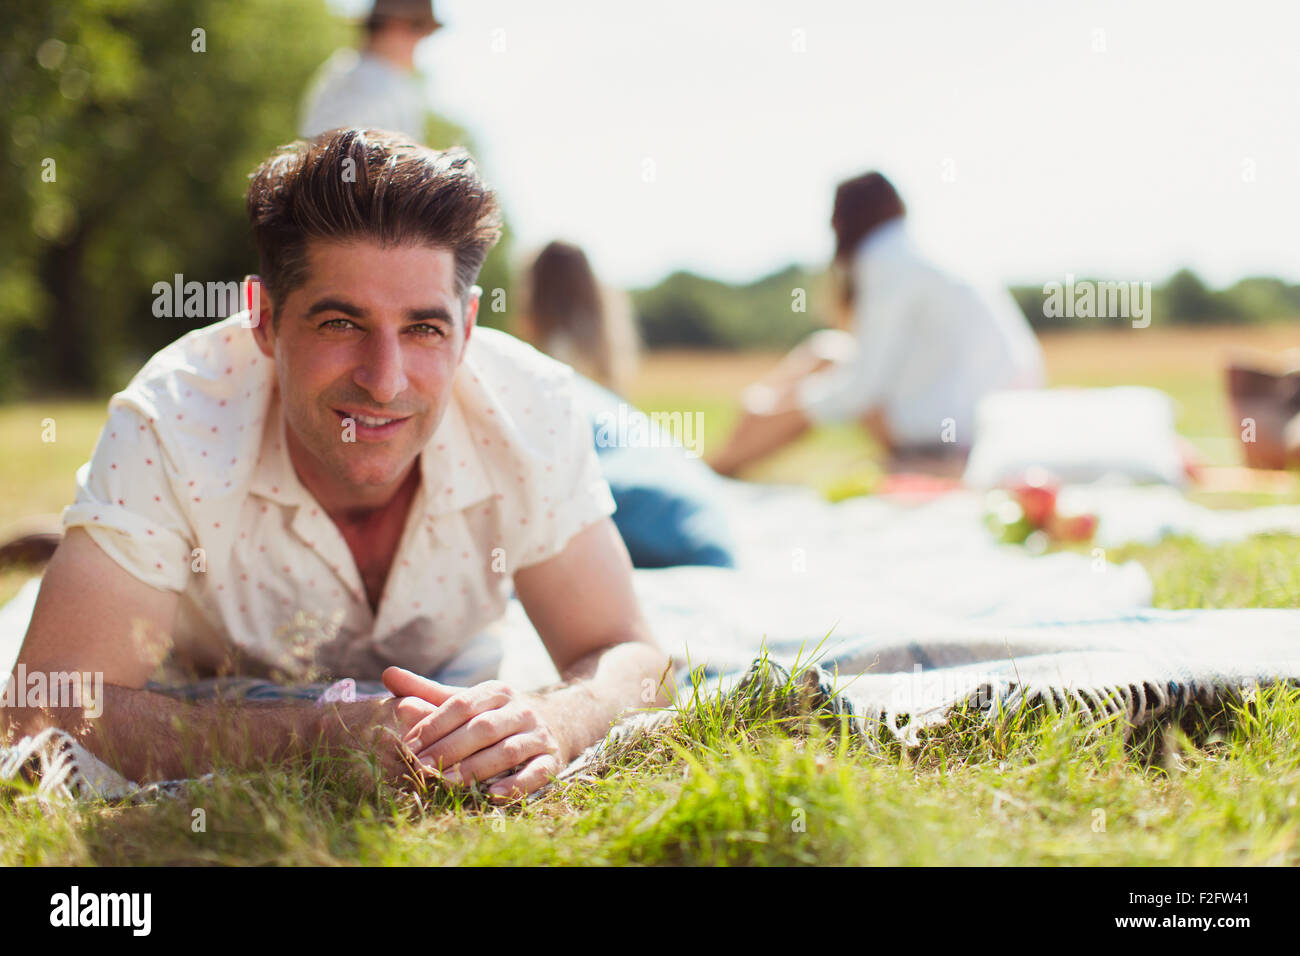 Portrait smiling man laying on picnic blanket in sunny field Stock Photo